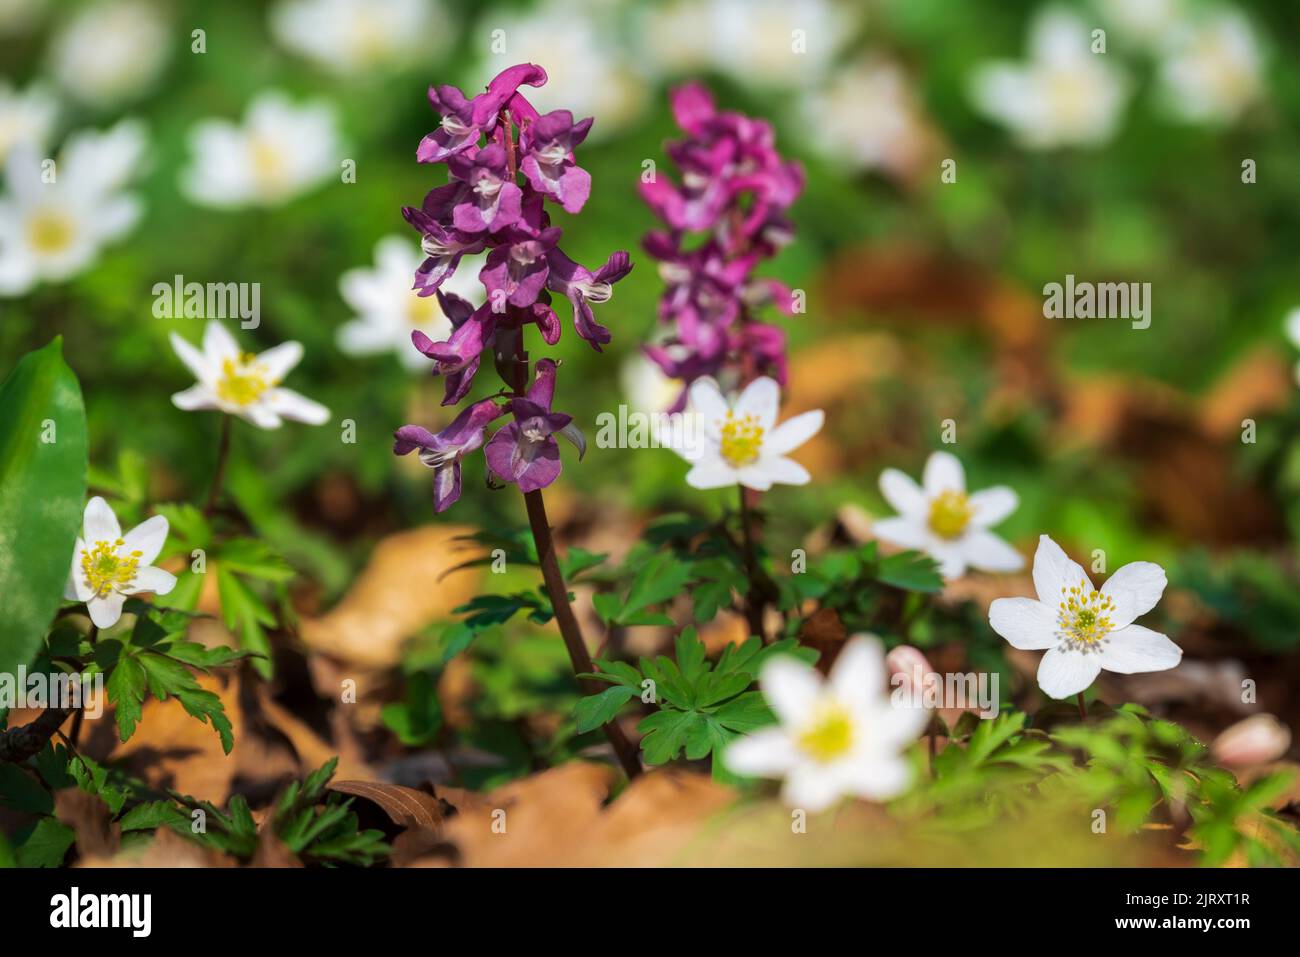 Purple flowering hollow larkspur (Corydalis cava), growing among wood anemones (Anemonoides nemorosa) in a spring forest in Germany Stock Photo